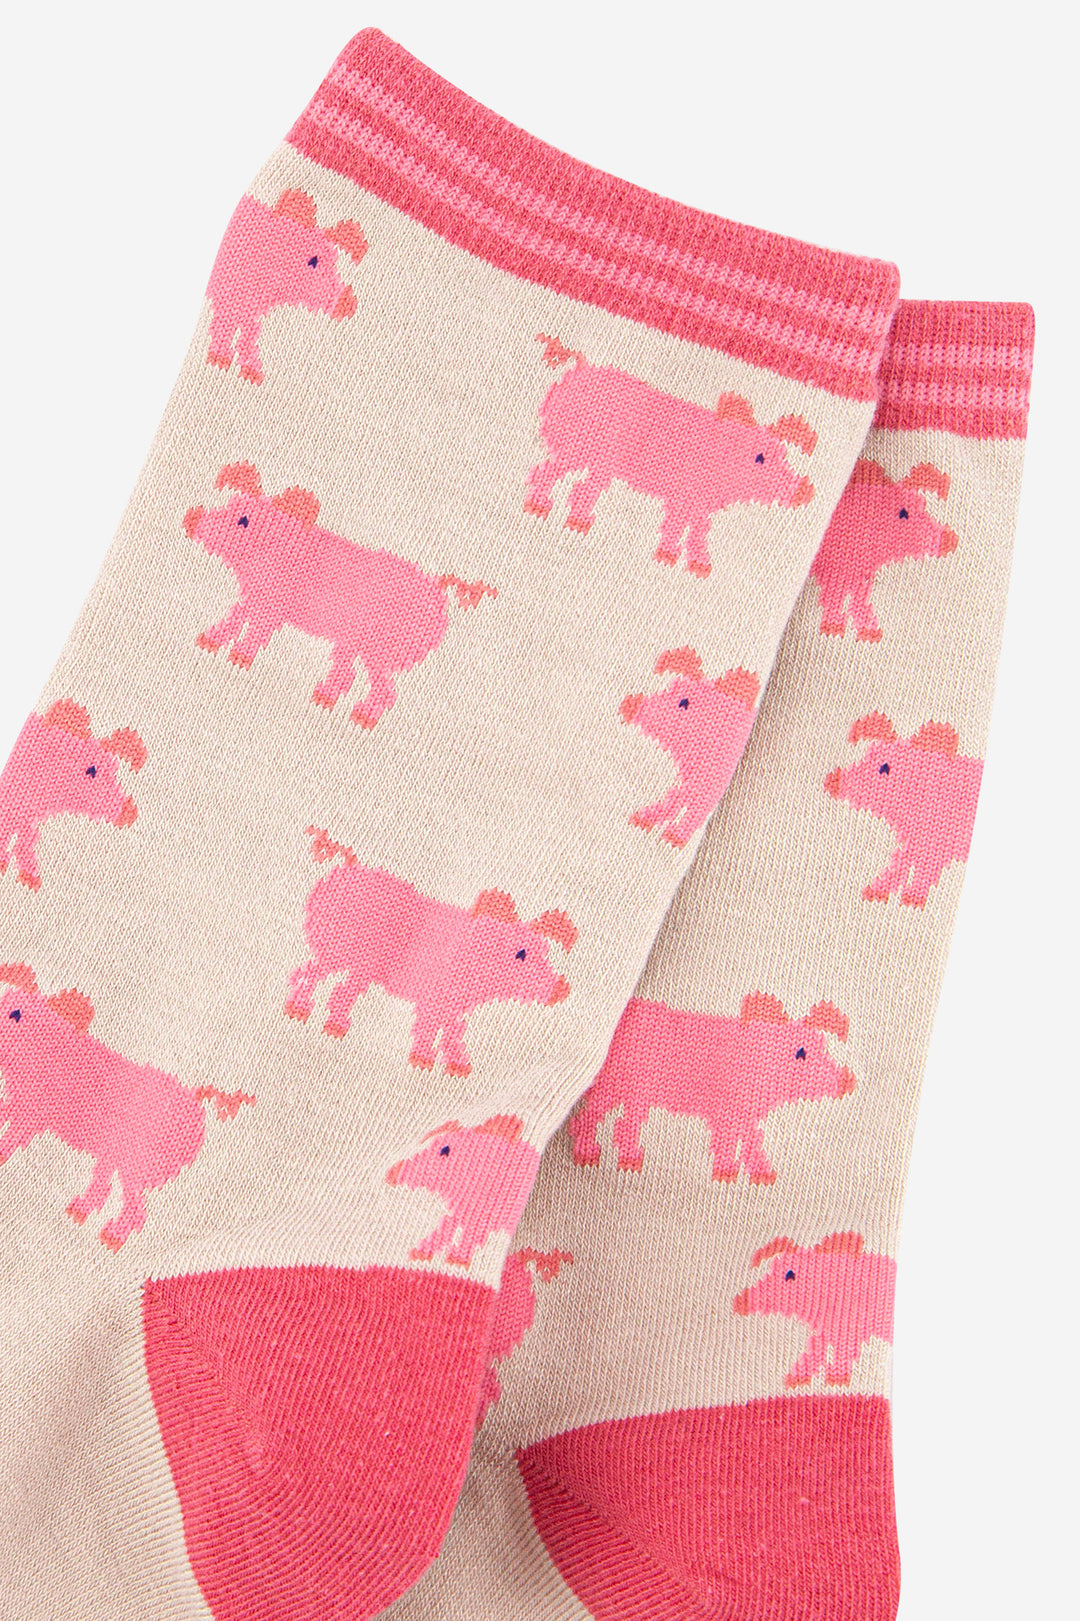 close up of the pink pig pattern on the ankle socks